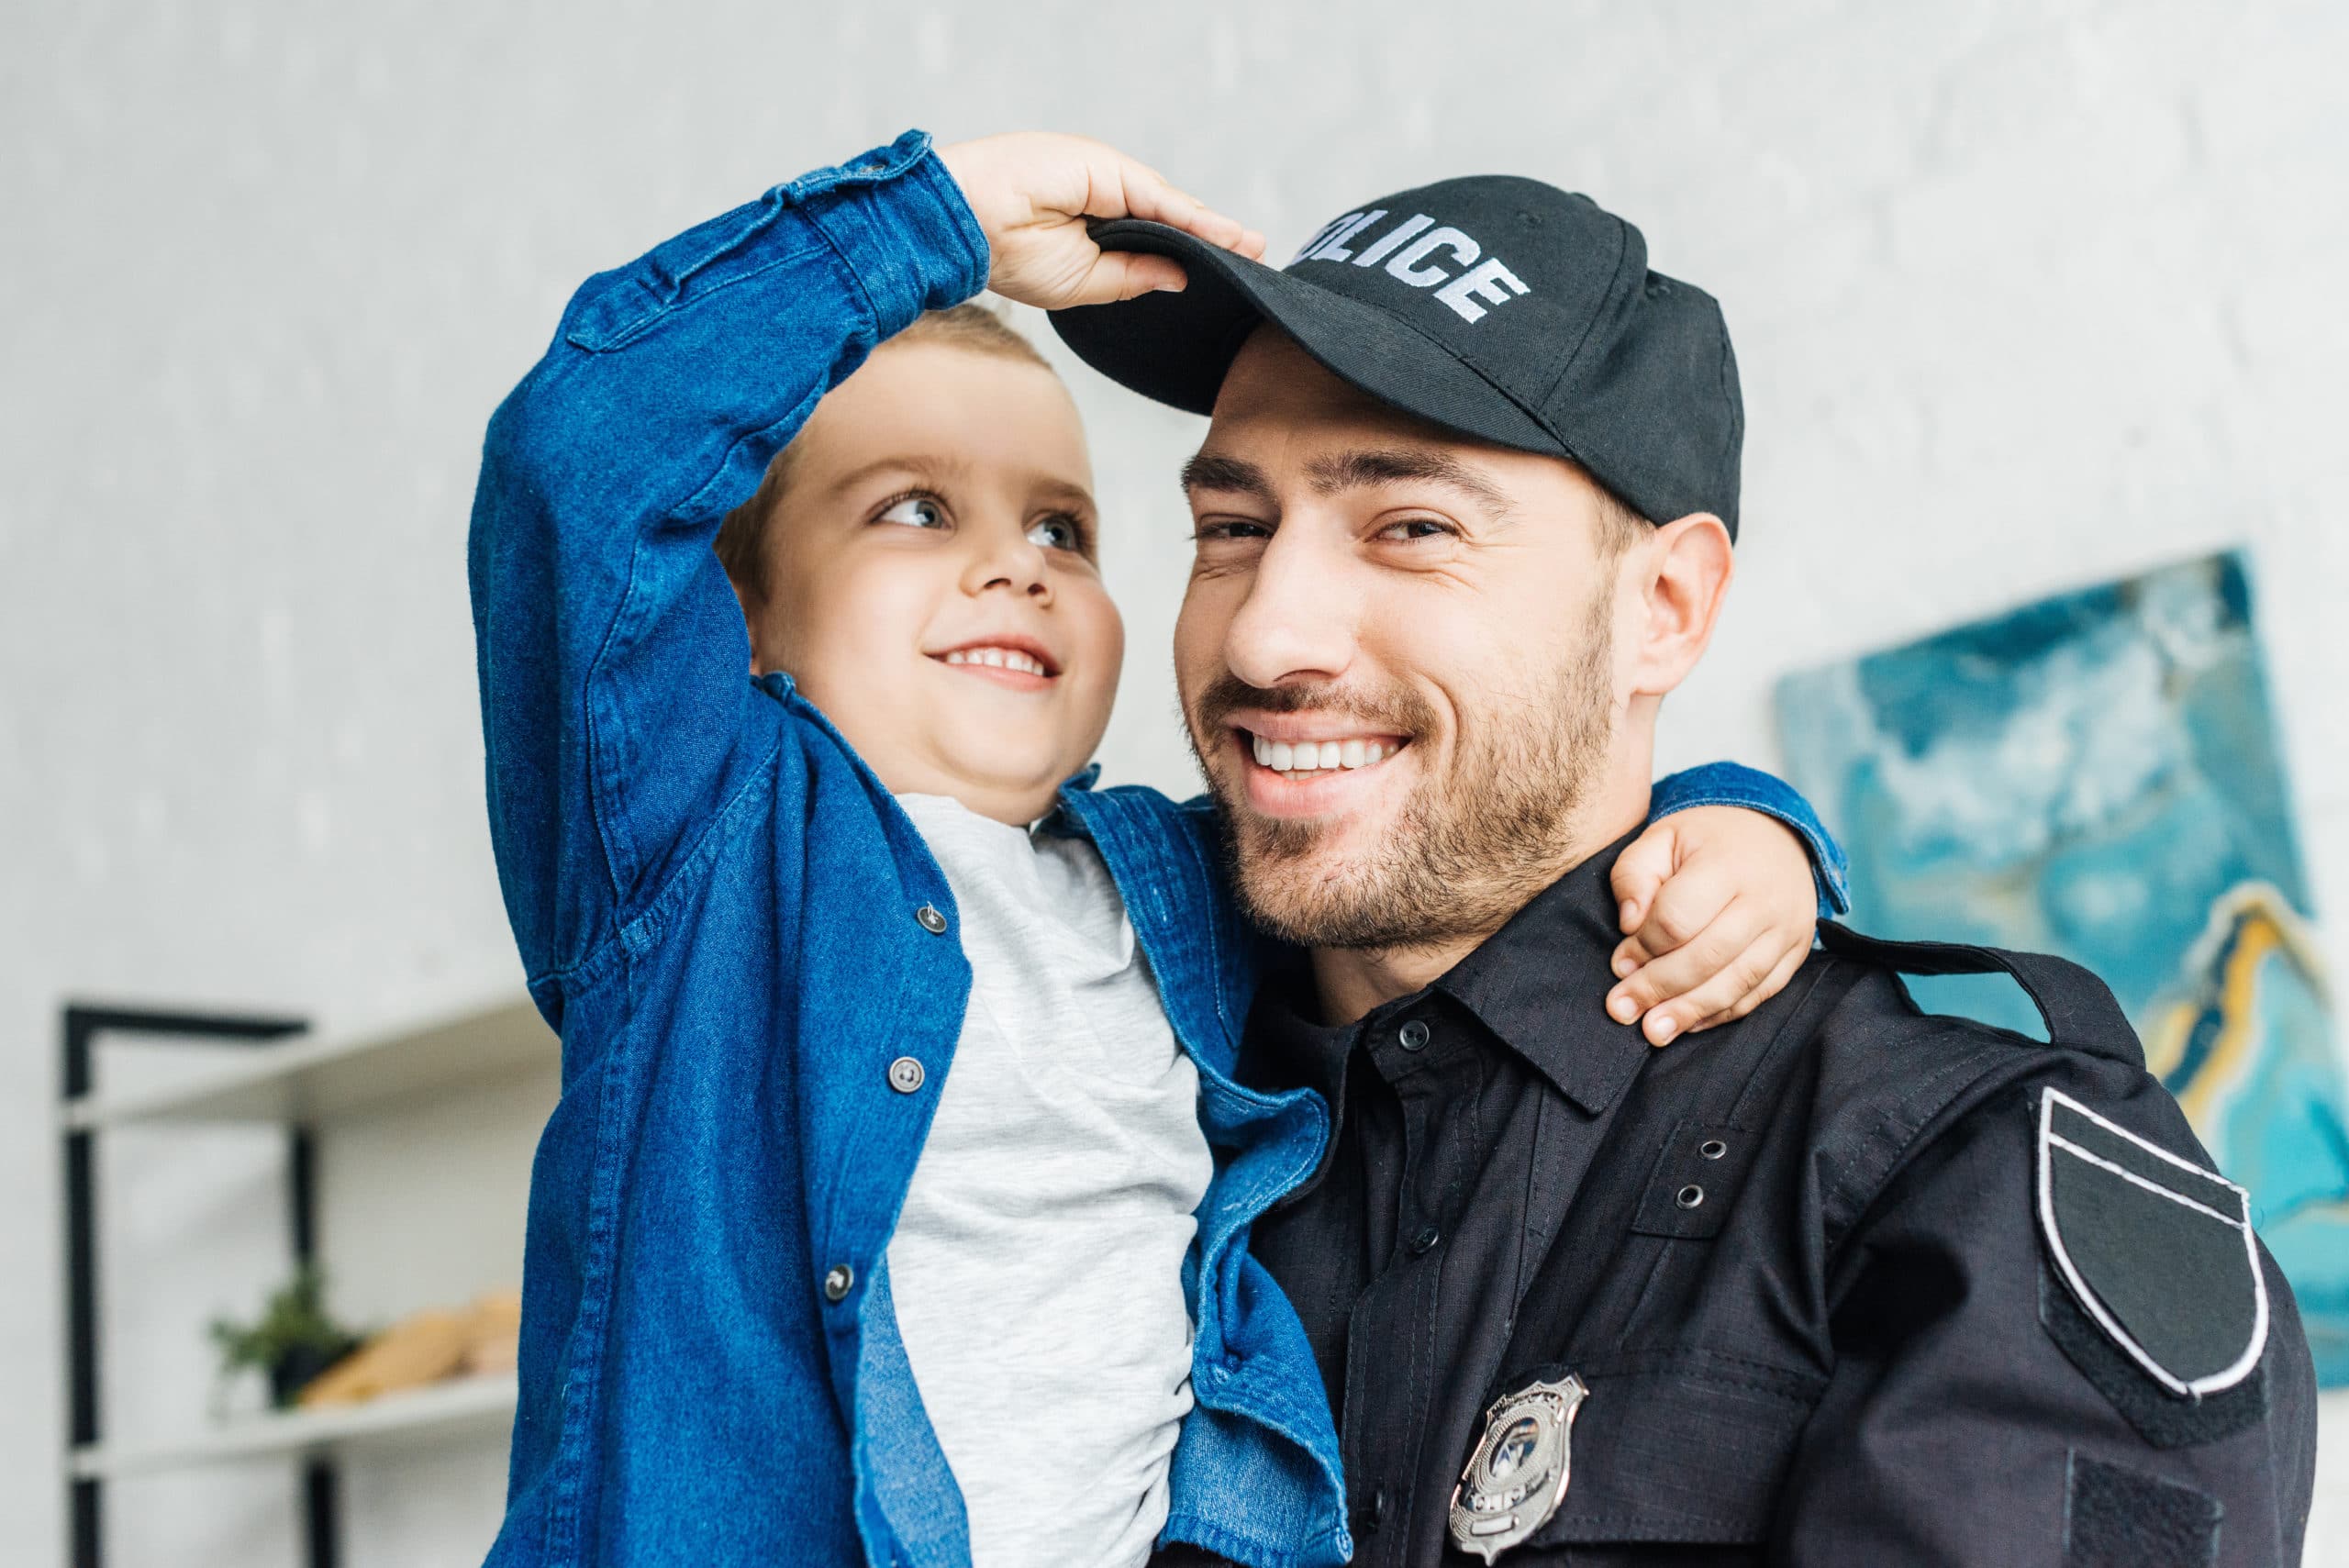 smiling police officer with child